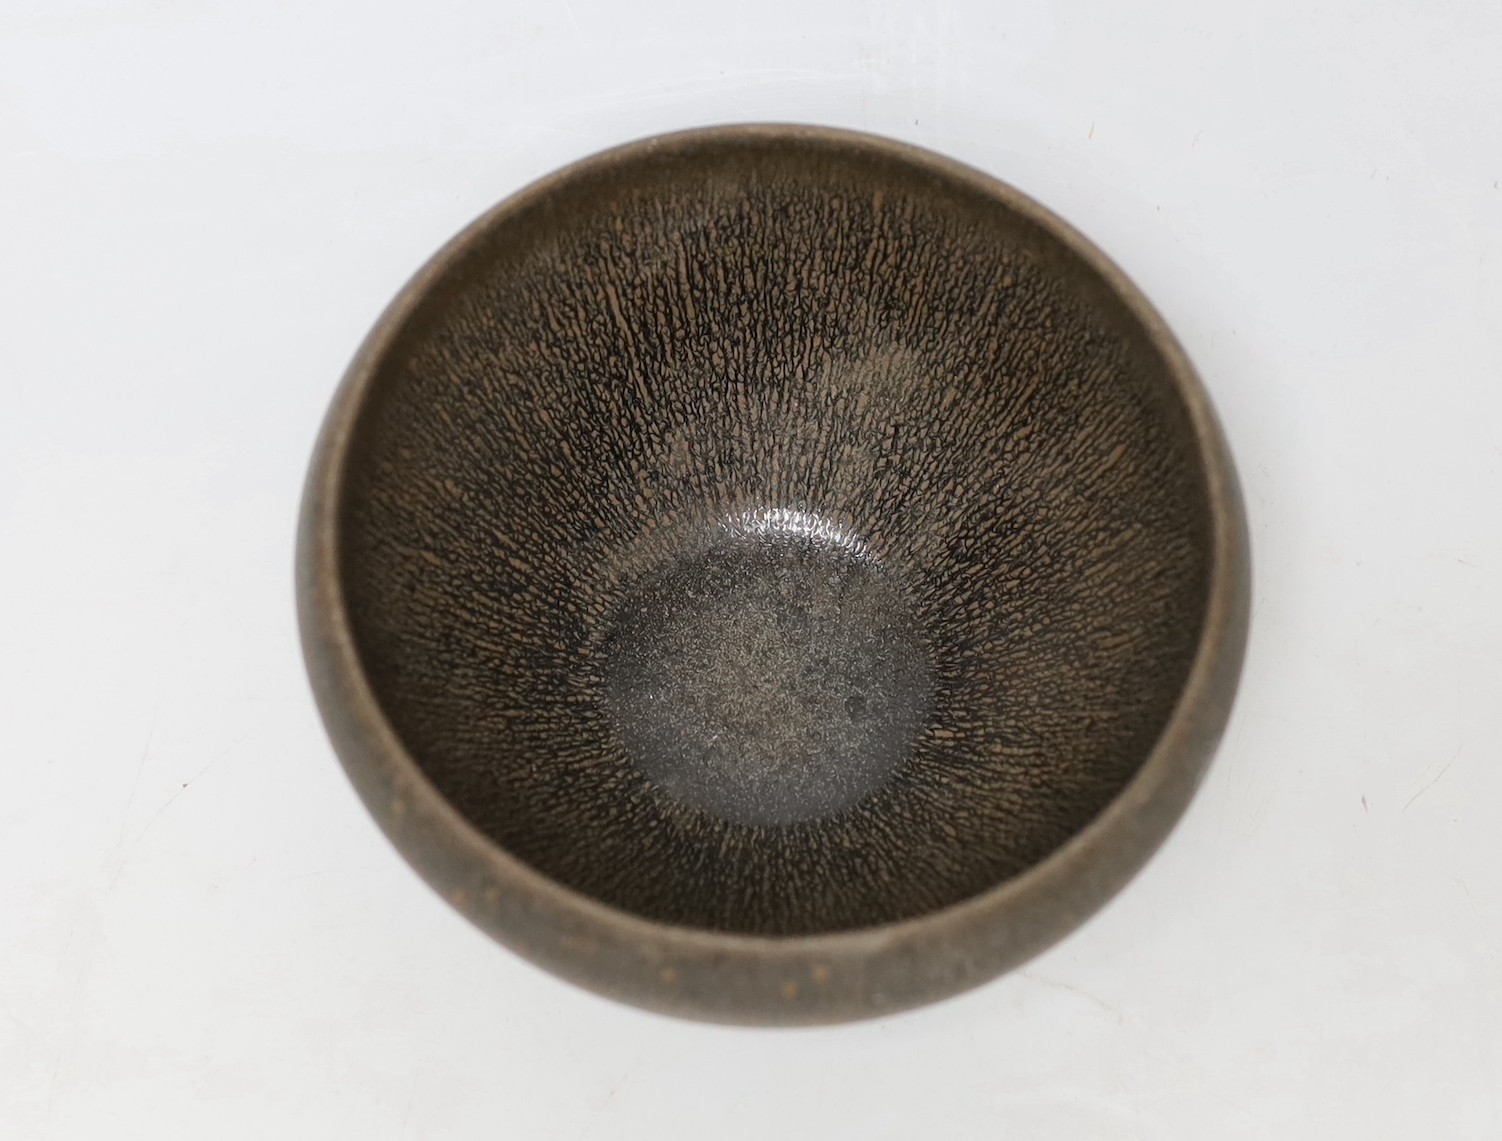 A Chinese brown pottery bowl, 11.5cms diameter